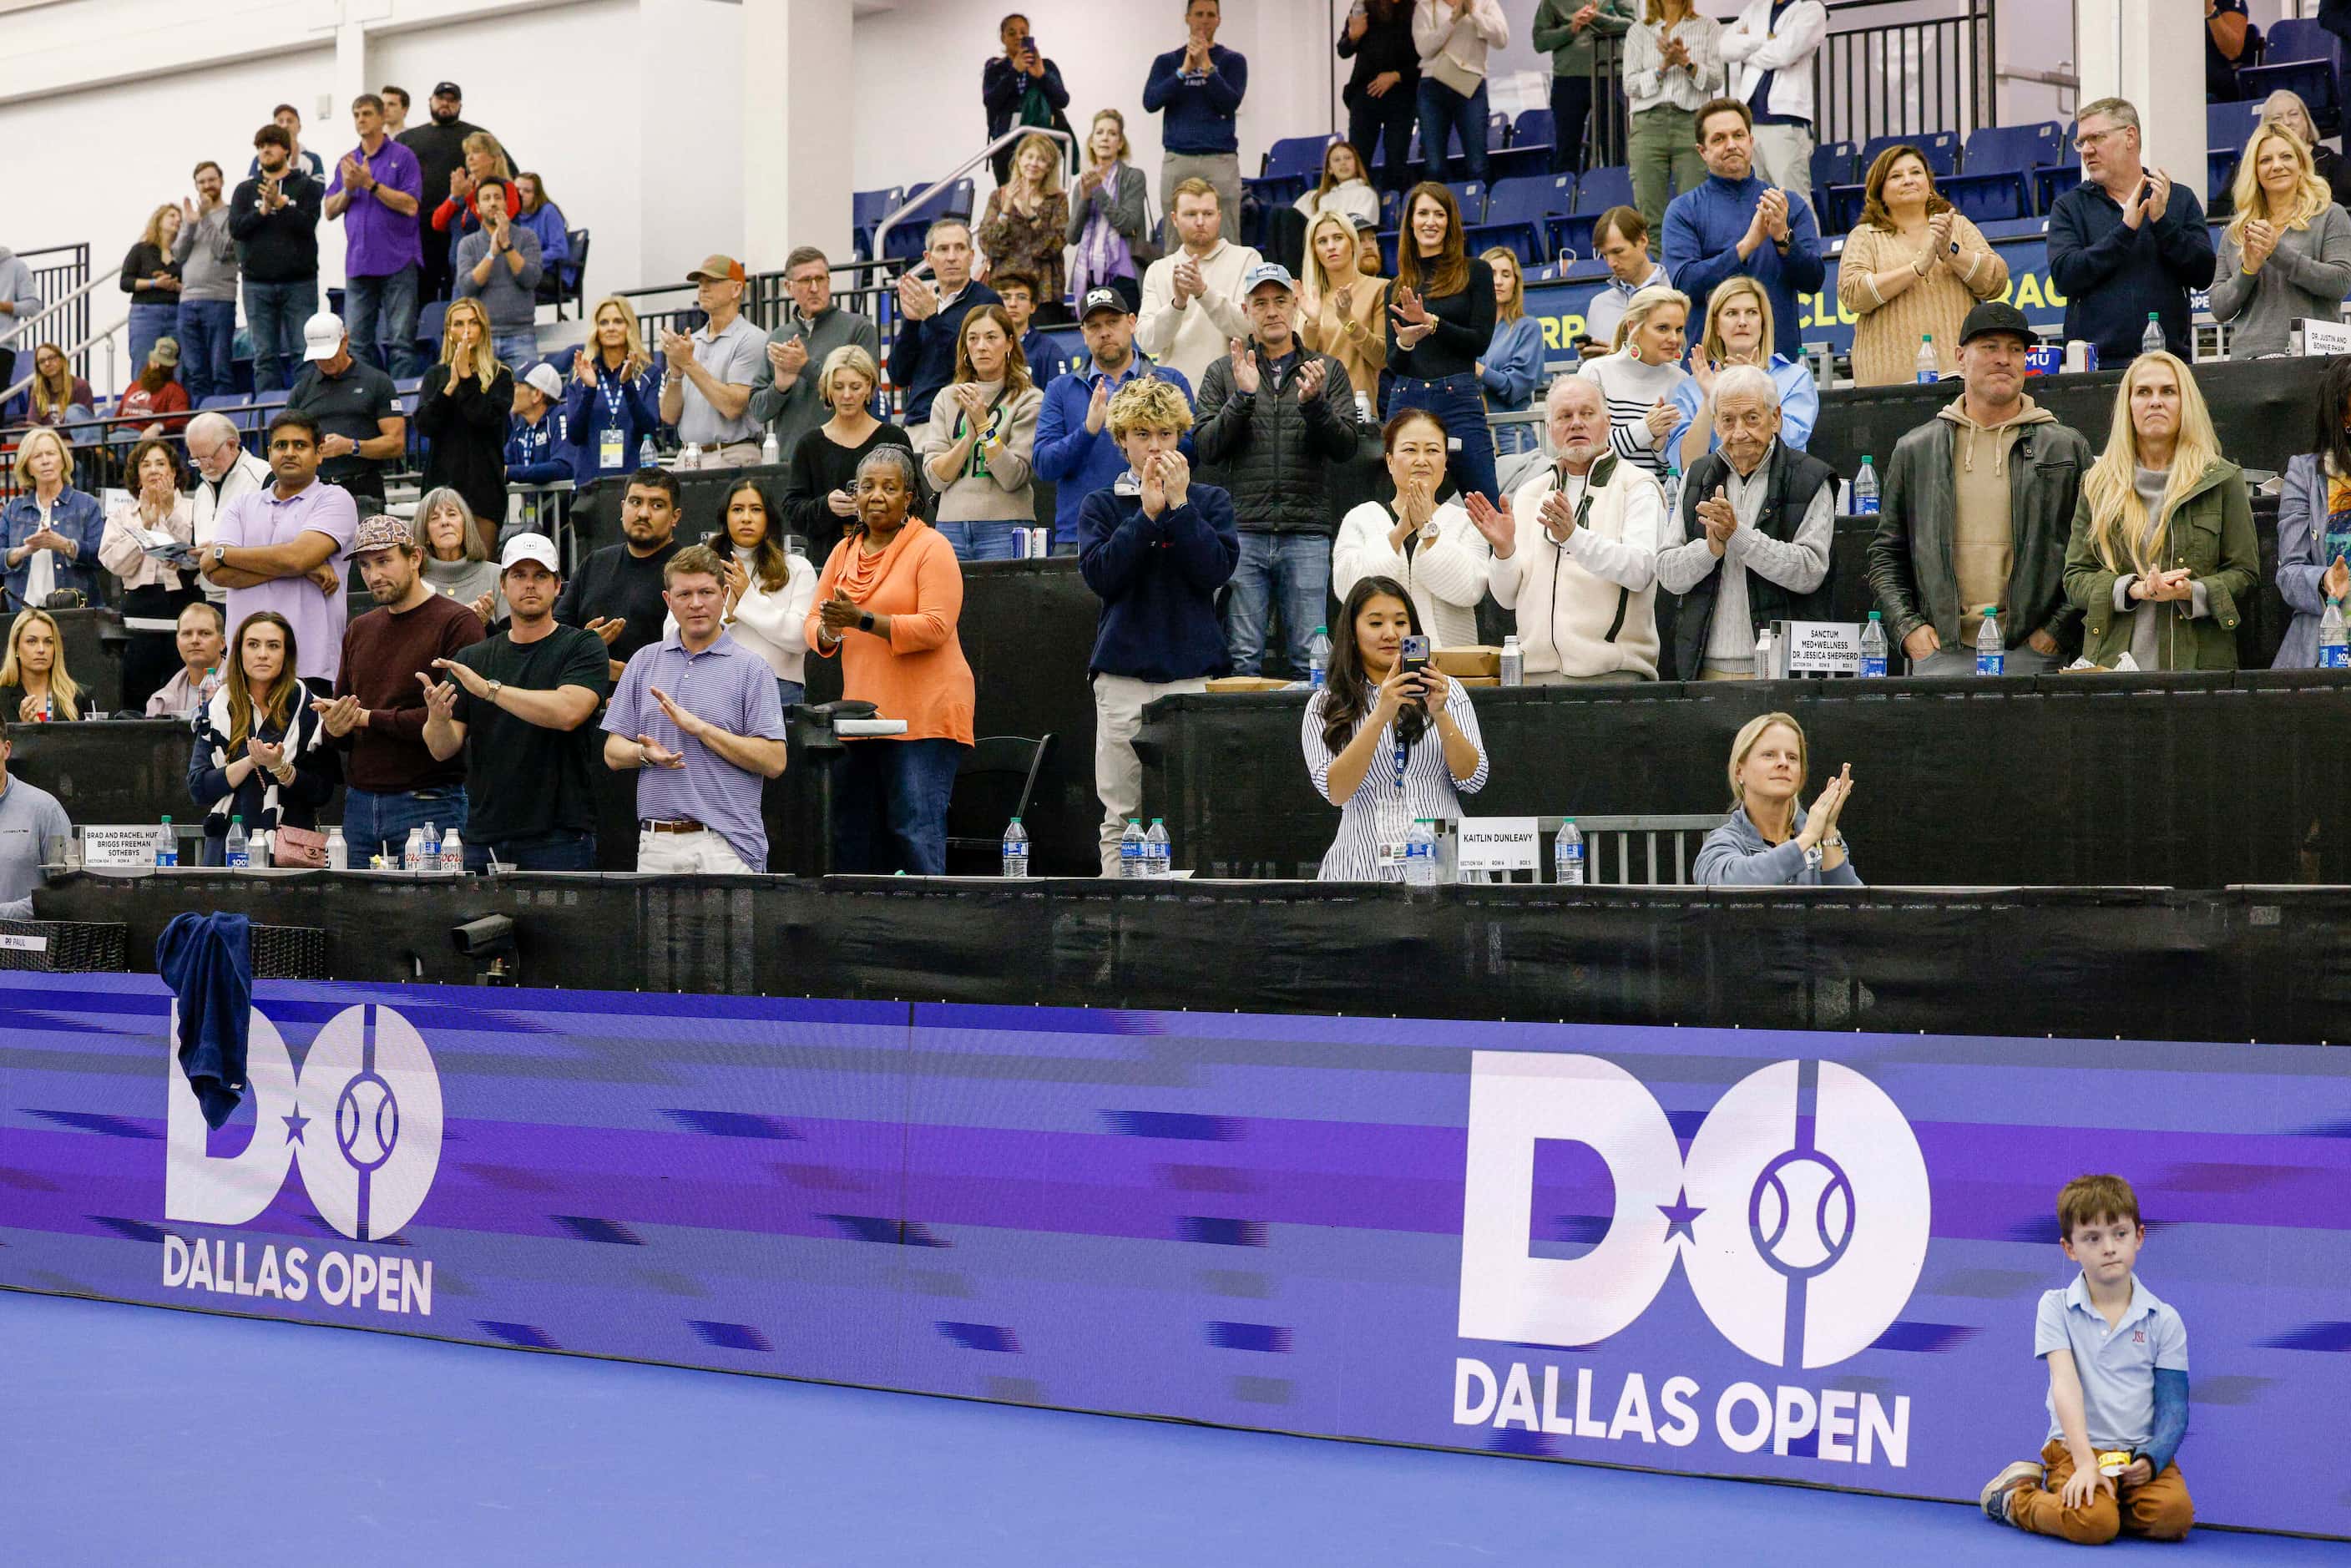 Fans cheer as Tommy Paul of the U.S. speaks after winning the ATP Dallas Open men's singles...